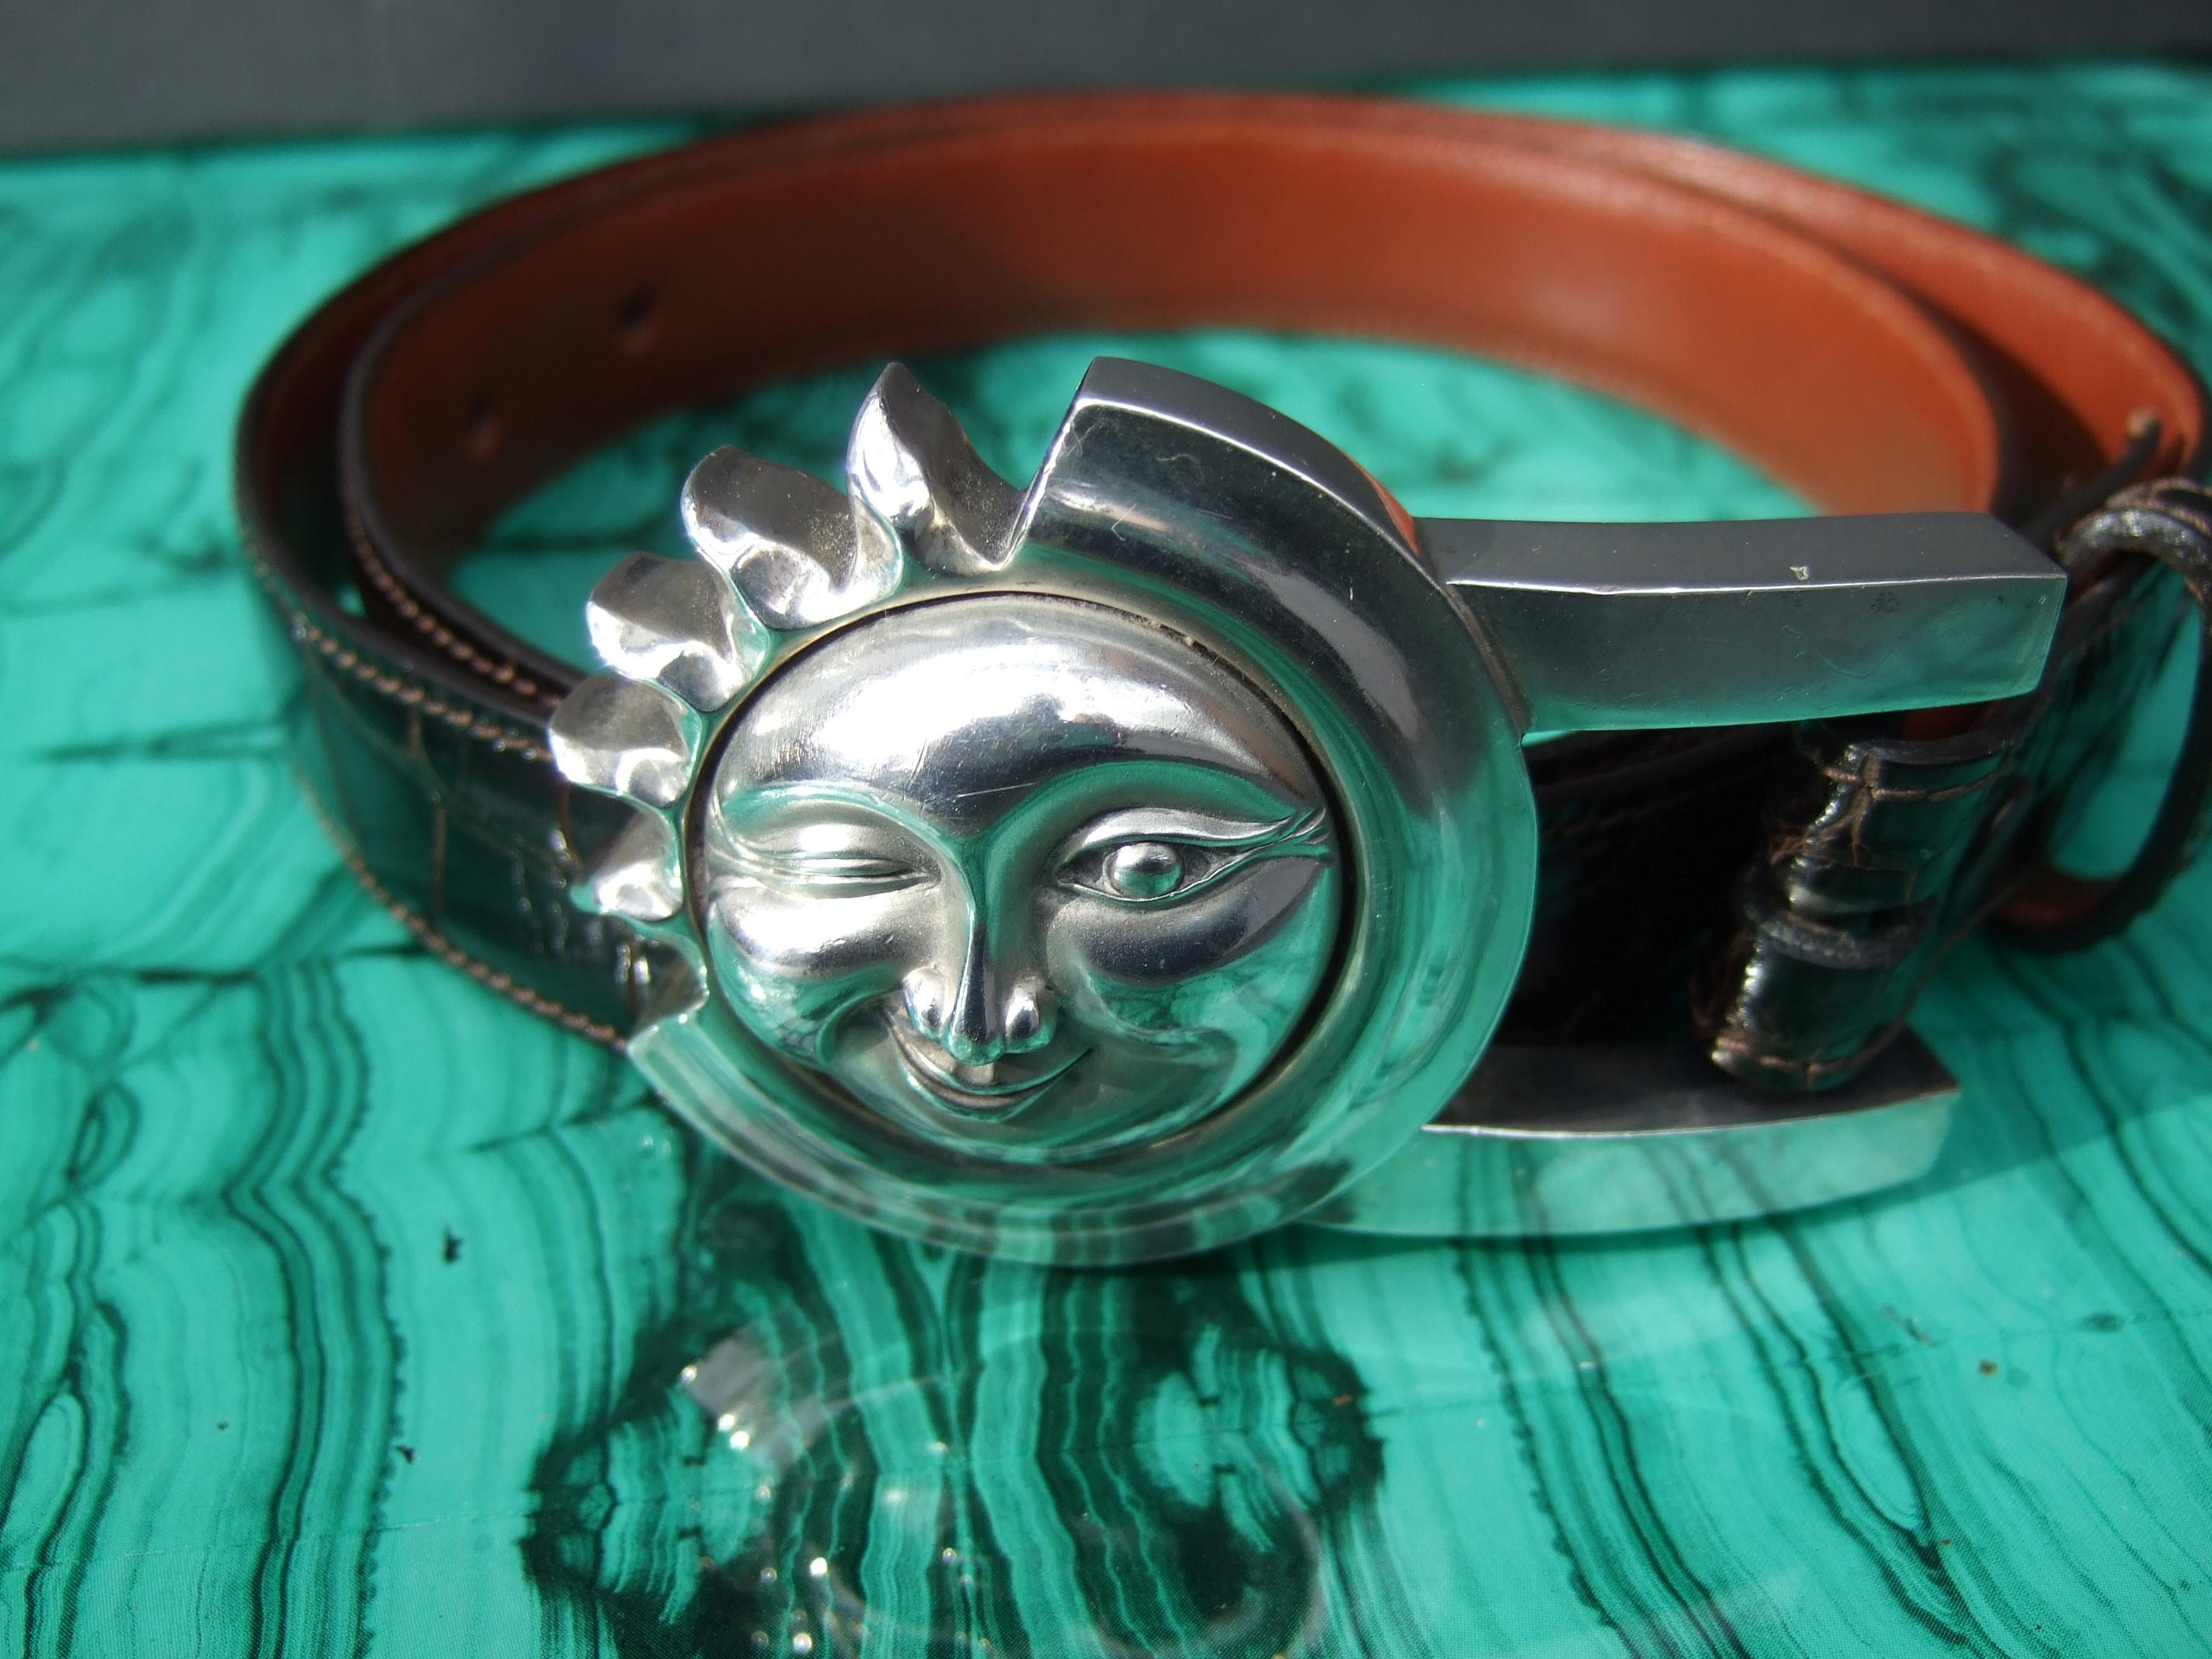 Barry Kieselstein-Cord Sterling silver moon & sun sleek brown alligator belt c 1990
The stylish belt is designed with a chunky large-scale sterling silver buckle
The celestial buckle depicts a moon-sun face buckle with a winking eye expression

The